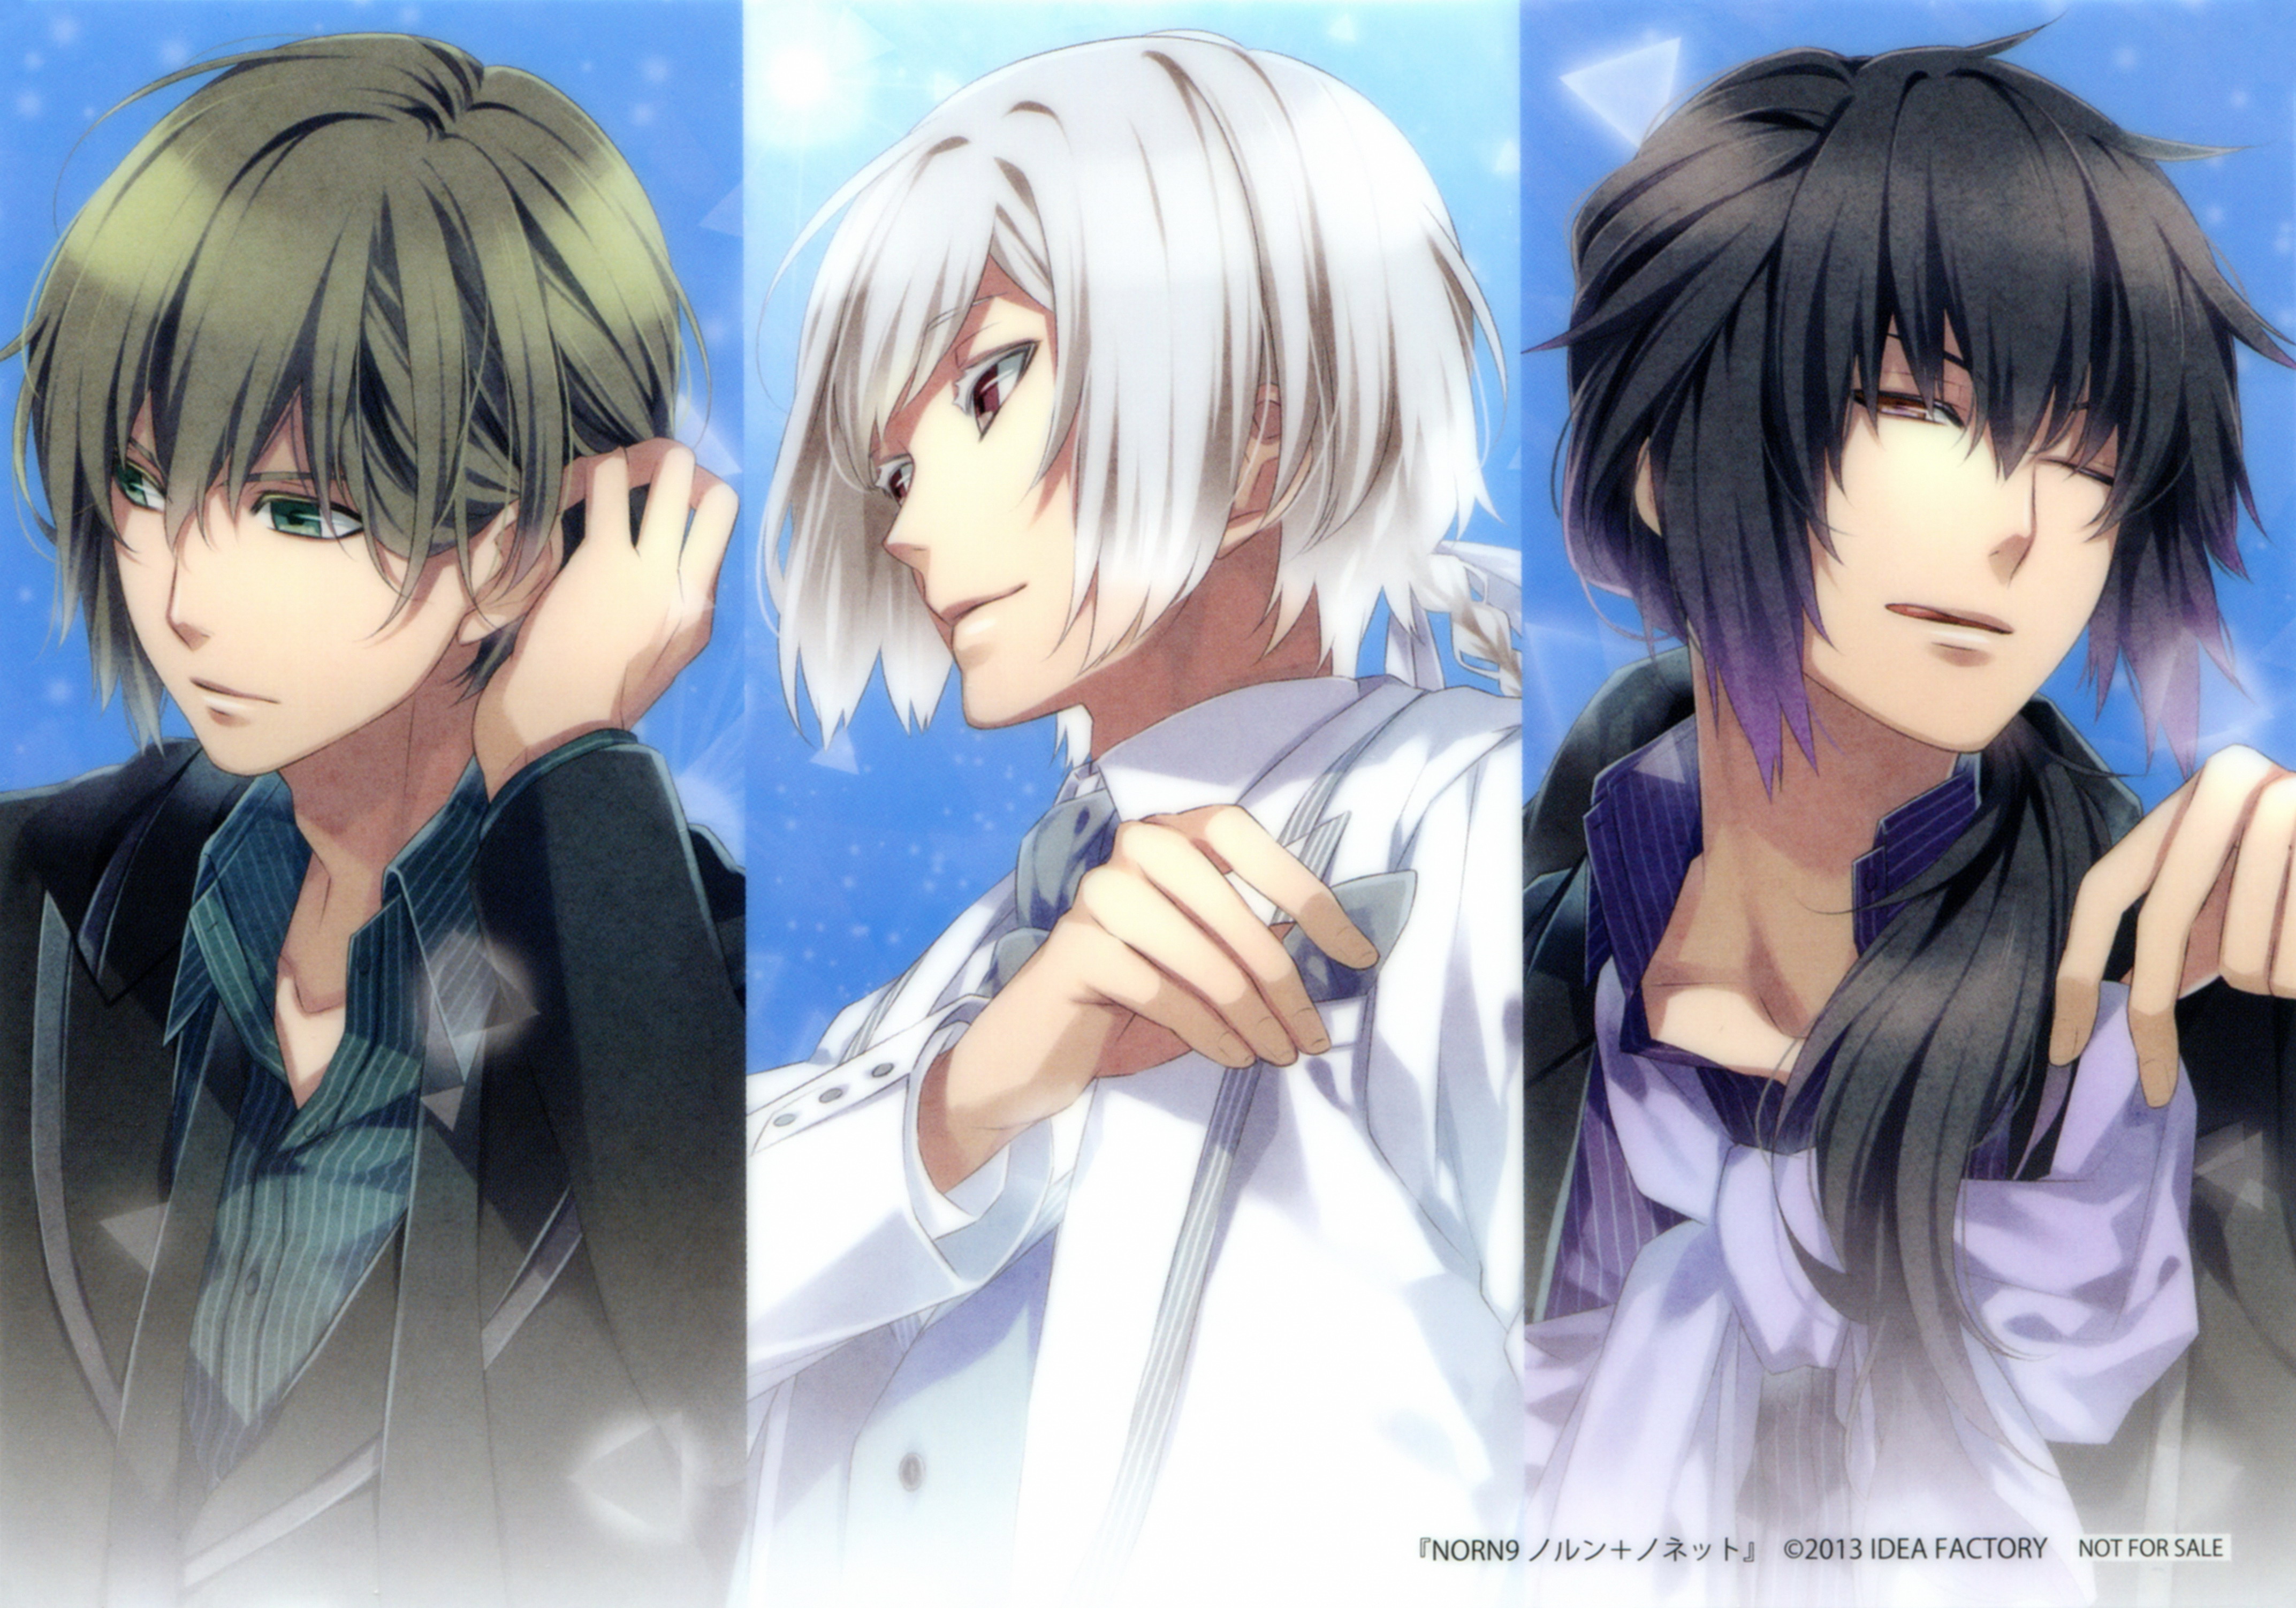 4290x3004 > Norn9: Norn + Nonette Wallpapers